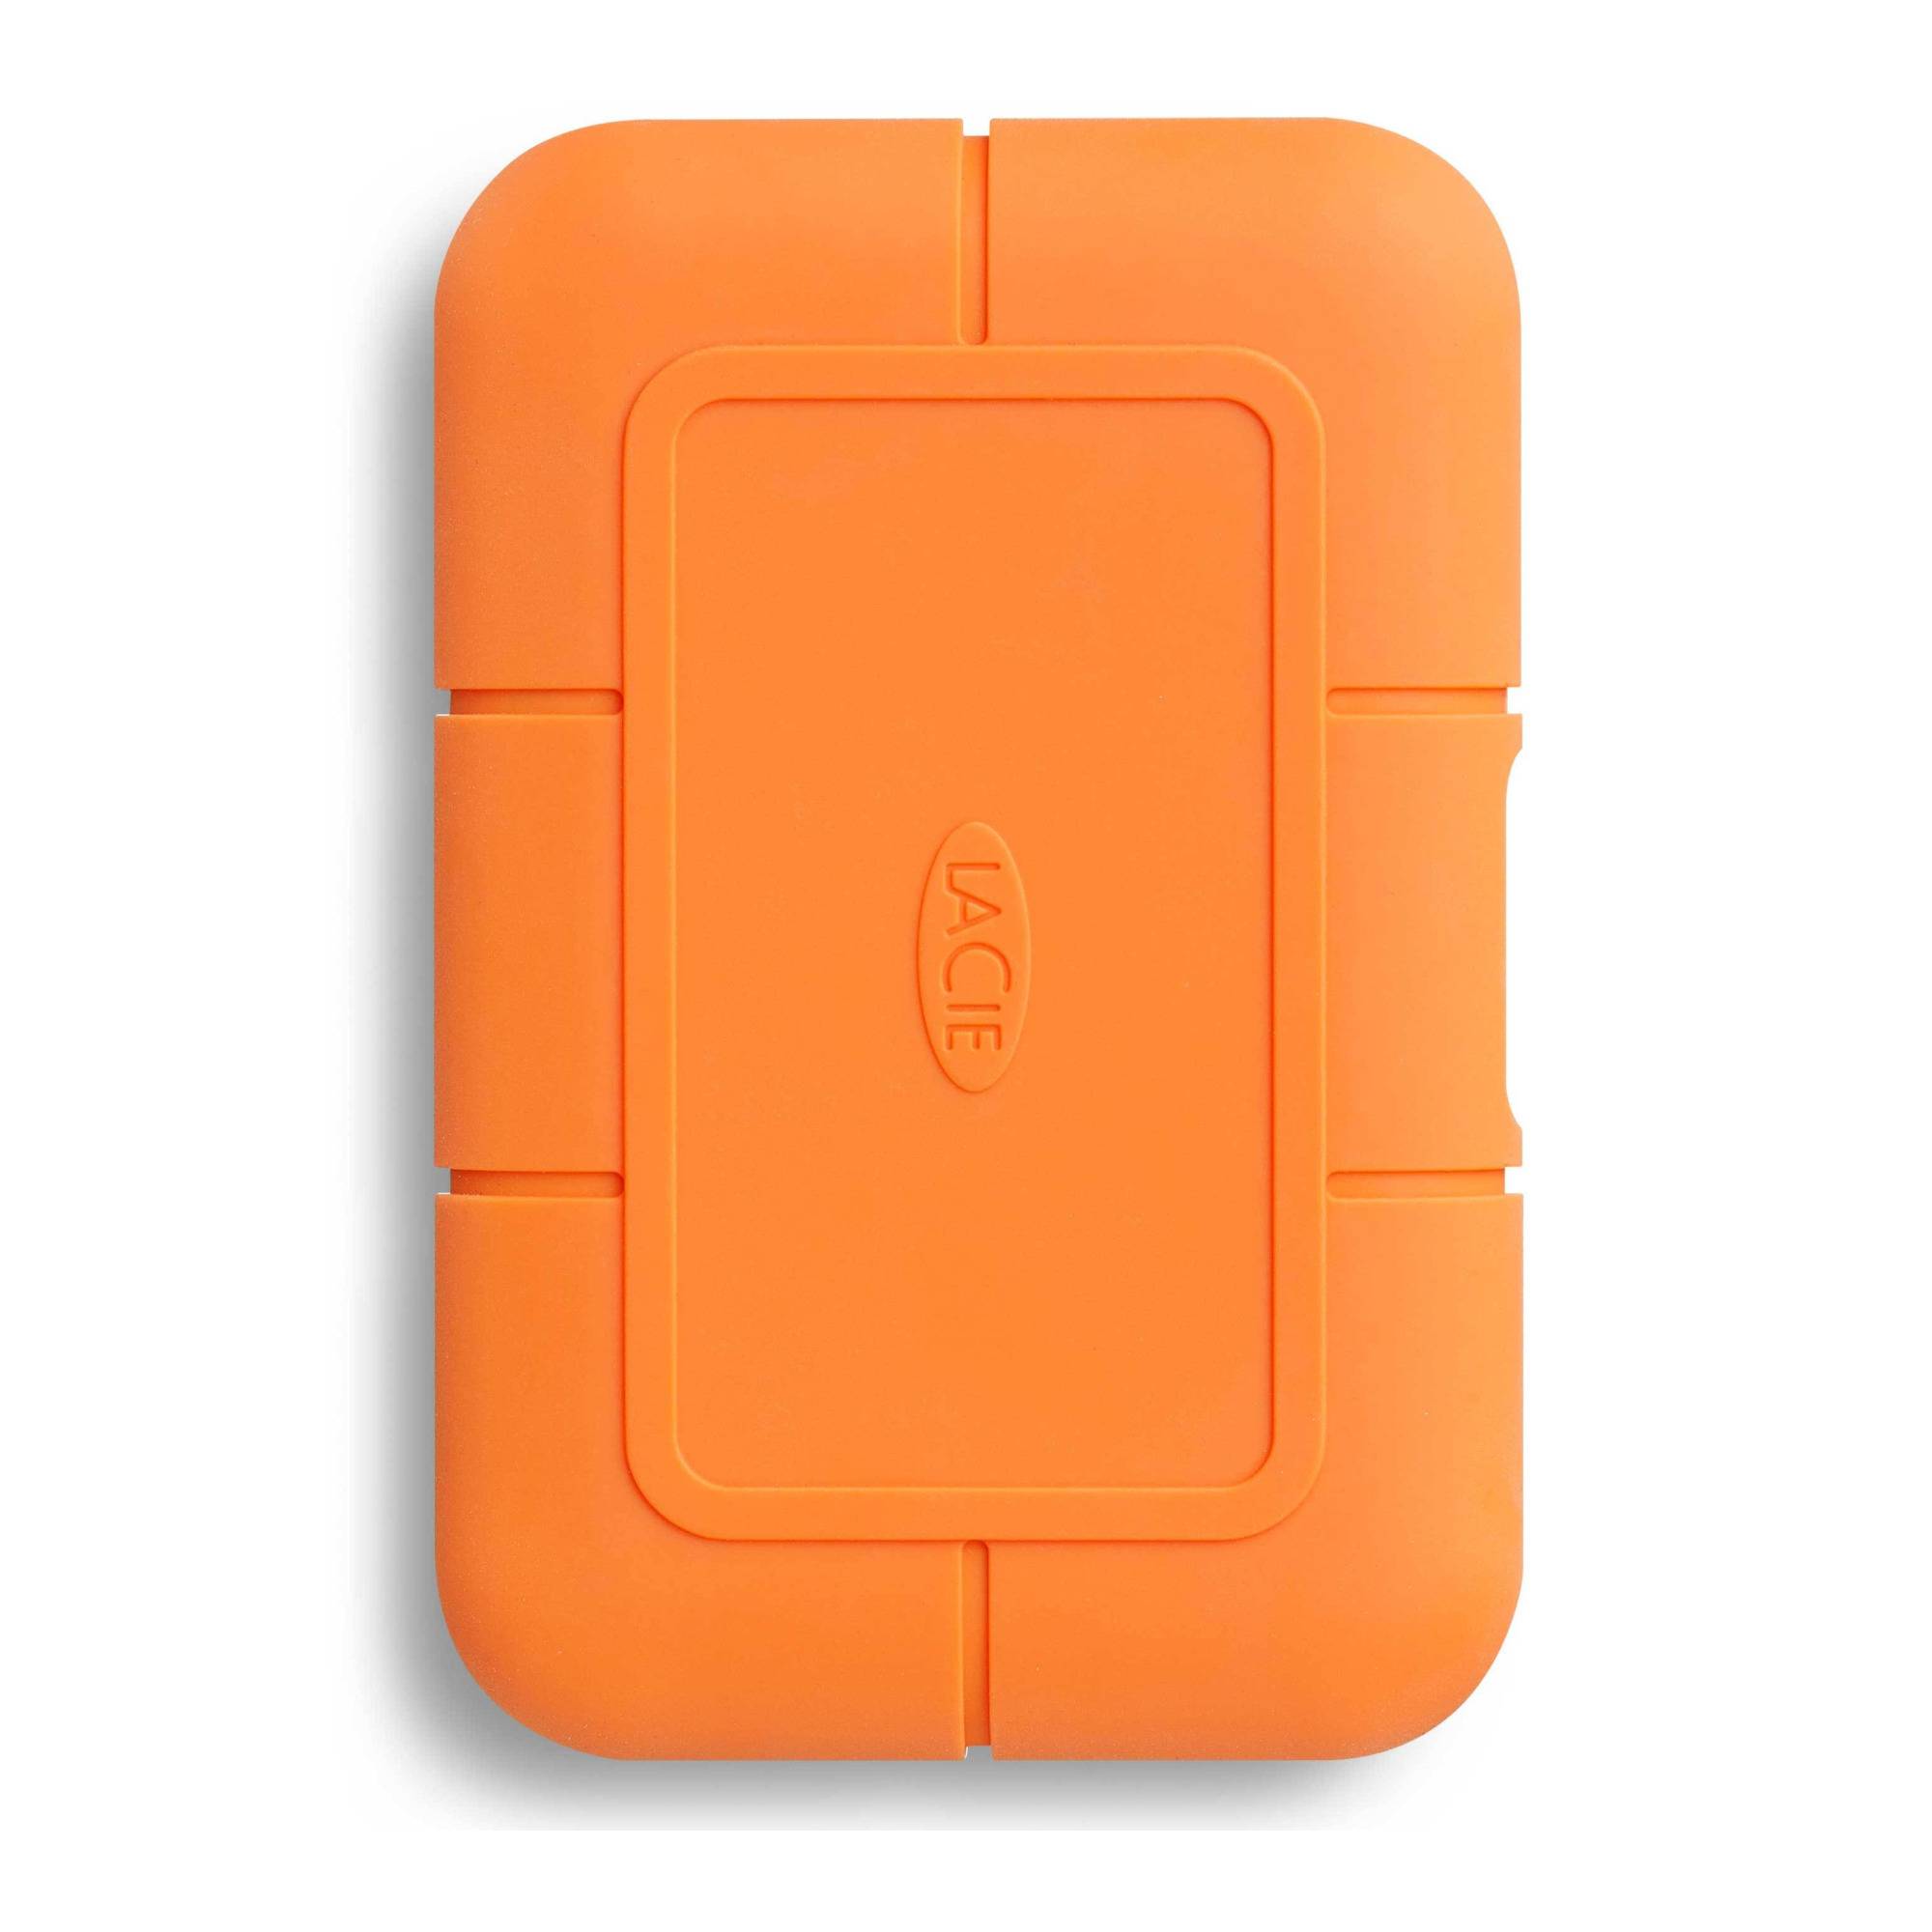 LaCie Rugged SSD 2TB Professional All-Terrain USB 3.1 Type-C External Solid State Drive